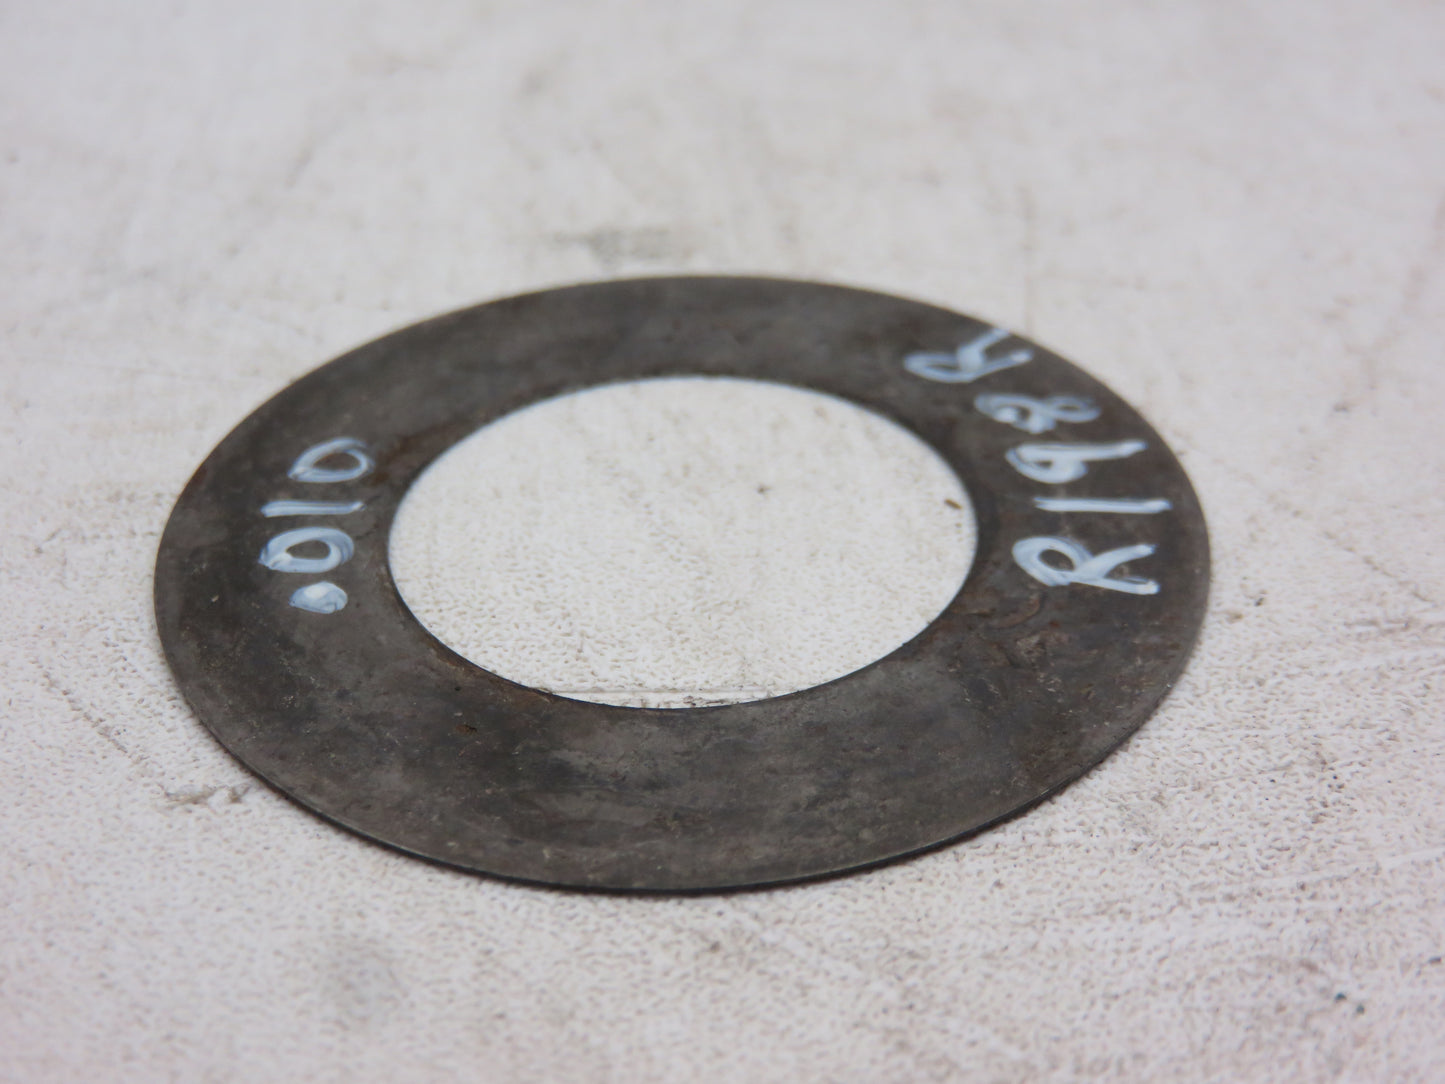 R200R John Deere Fan And Engine Oil Pump Drive Shim Washer For R, 70, 80, 720, 820, 730, 830